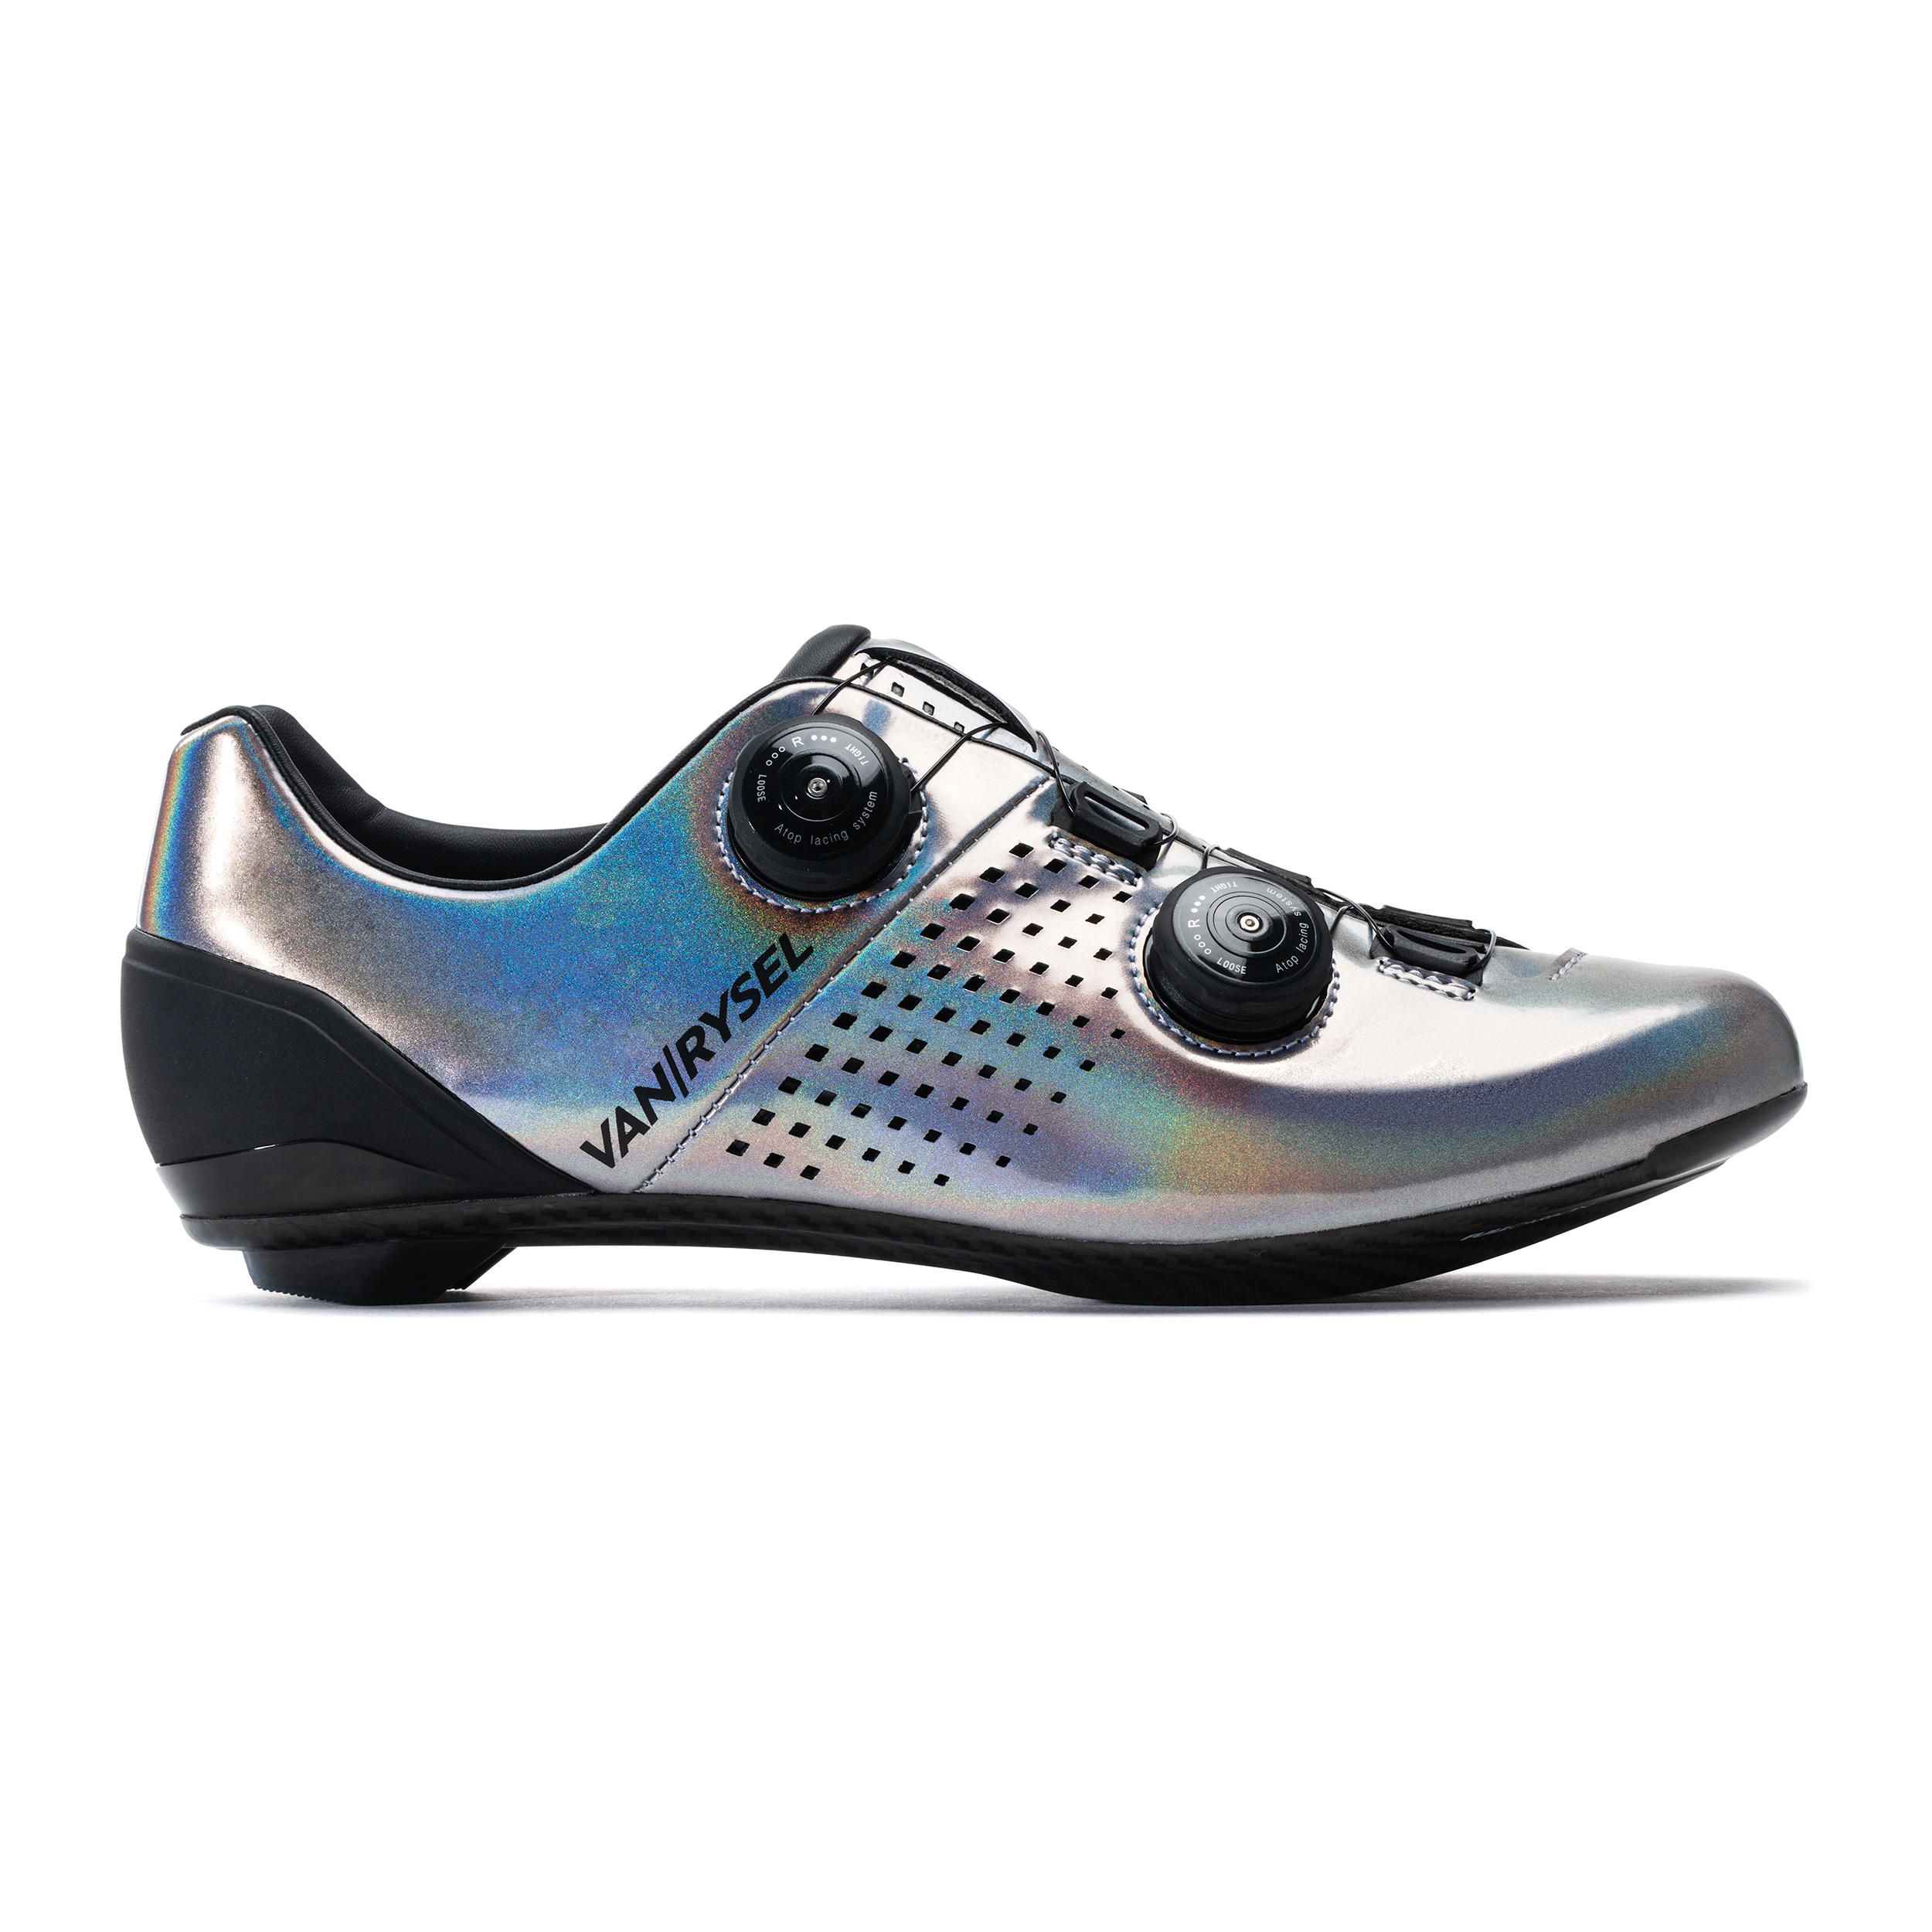 Yhjmdp Cycling Shoes Road Bike Shoes Breathable Bicycle Shoes Professional Cycling Sneaker for Men Women 